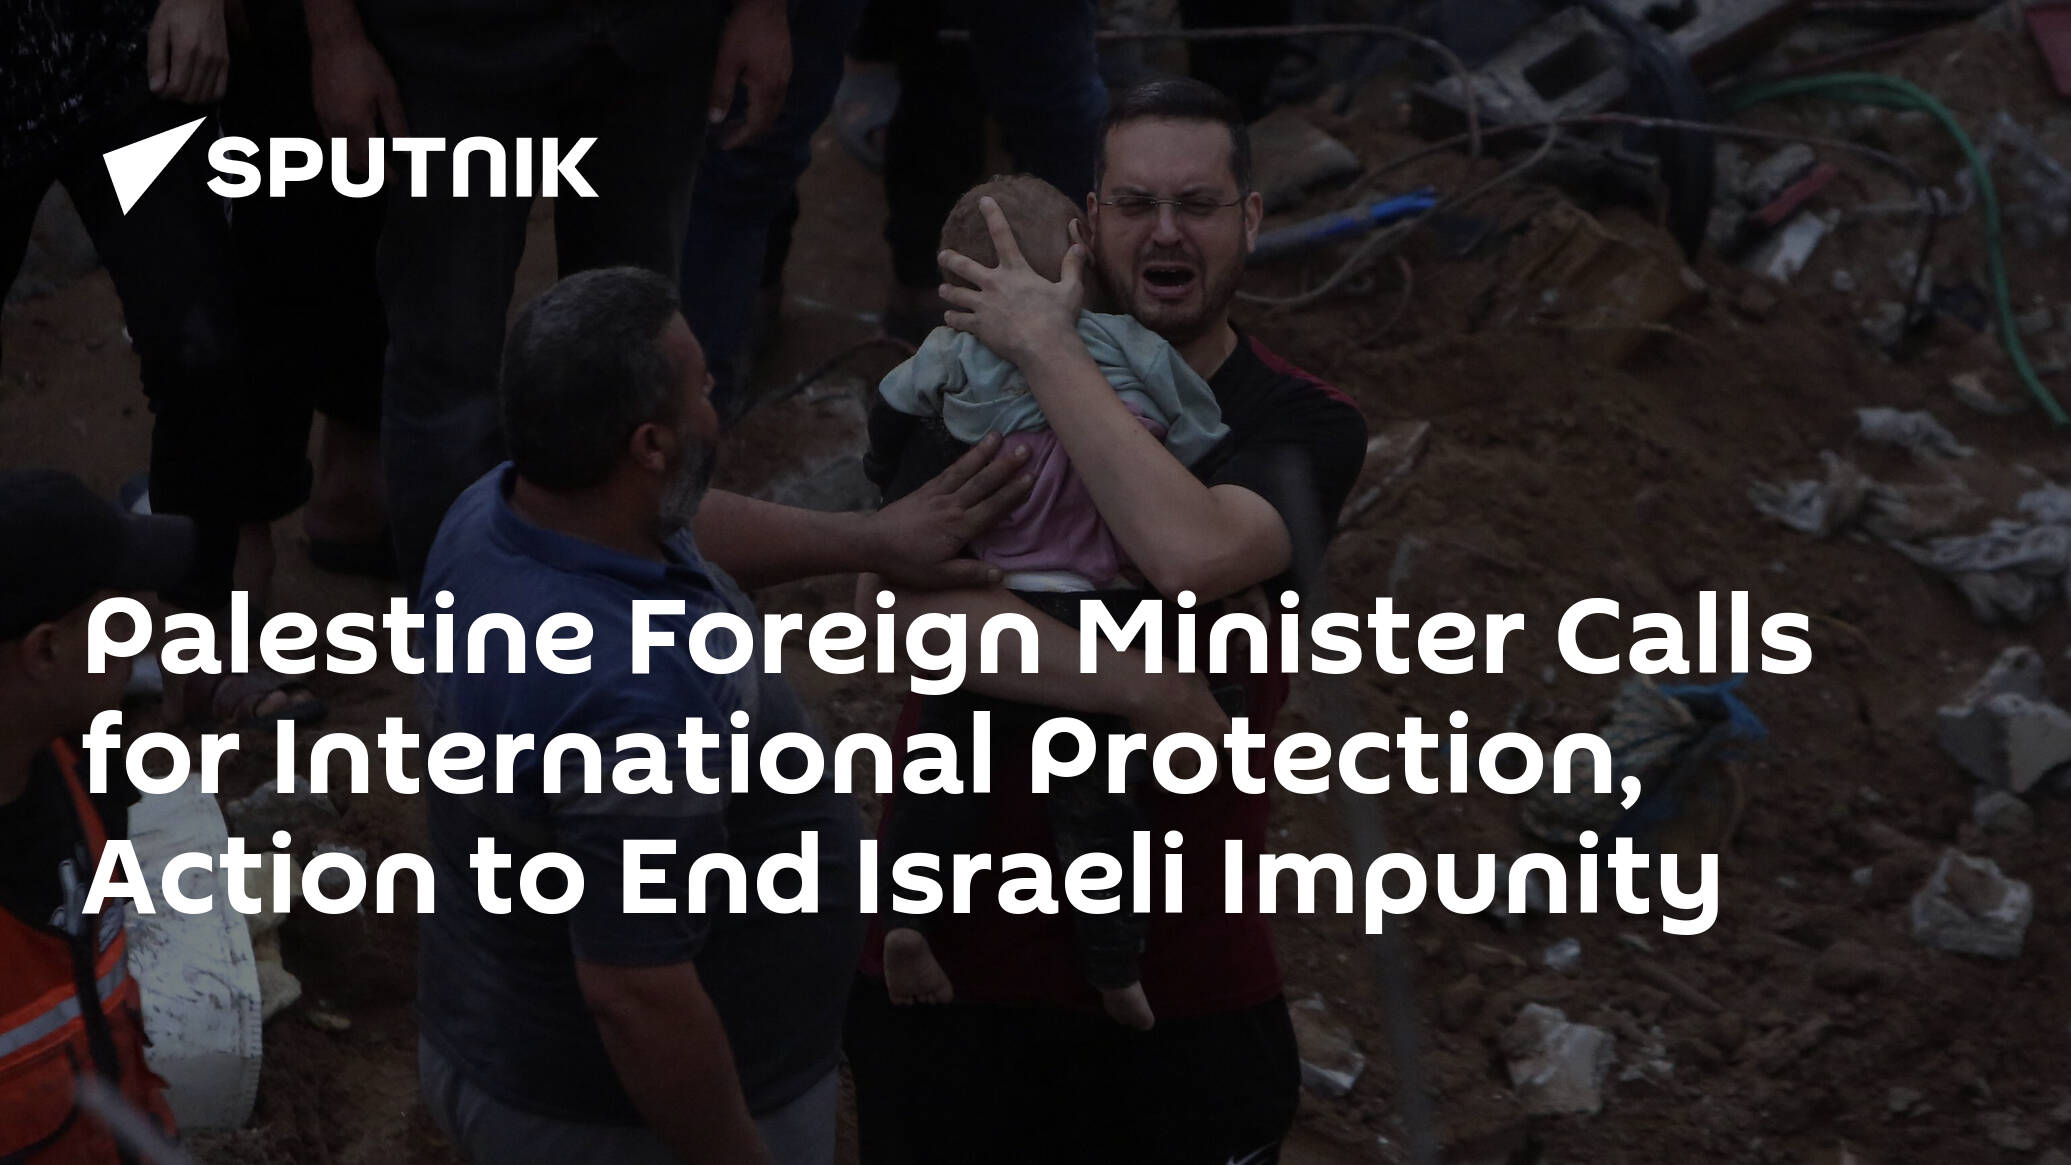 Palestine Foreign Minister Calls for International Protection, Action to End Israeli Impunity